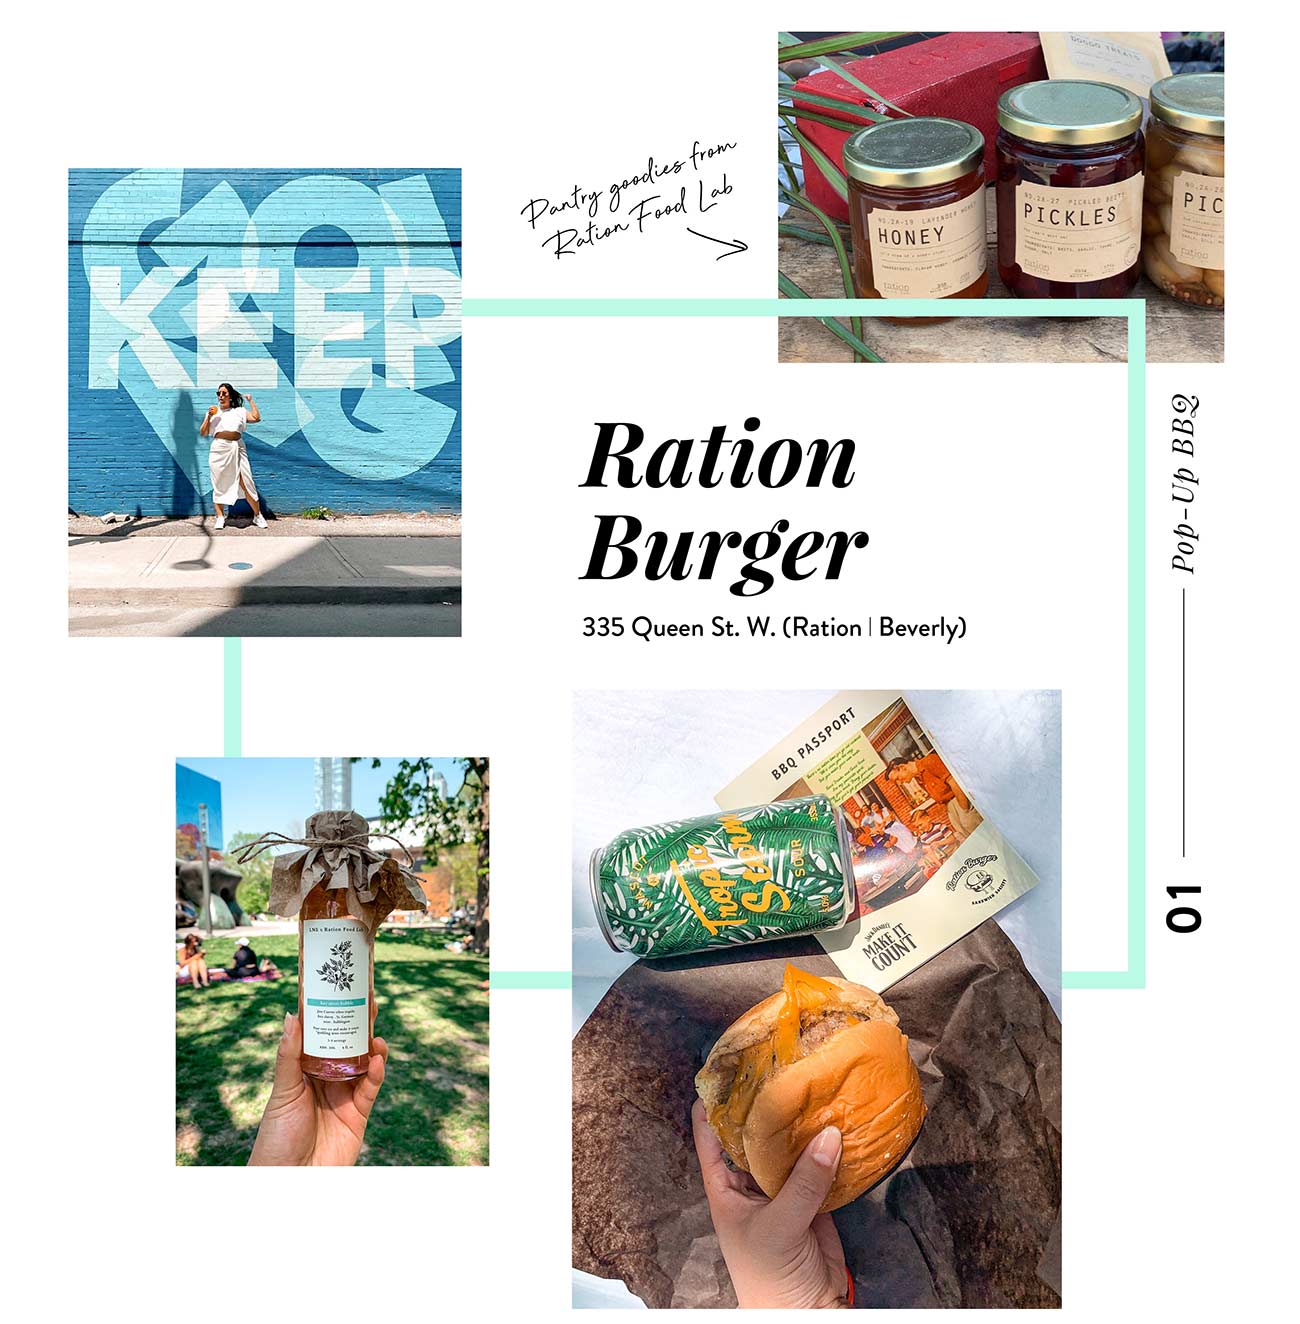 Places to eat in Toronto - Toronto restaurants - Ration Burger